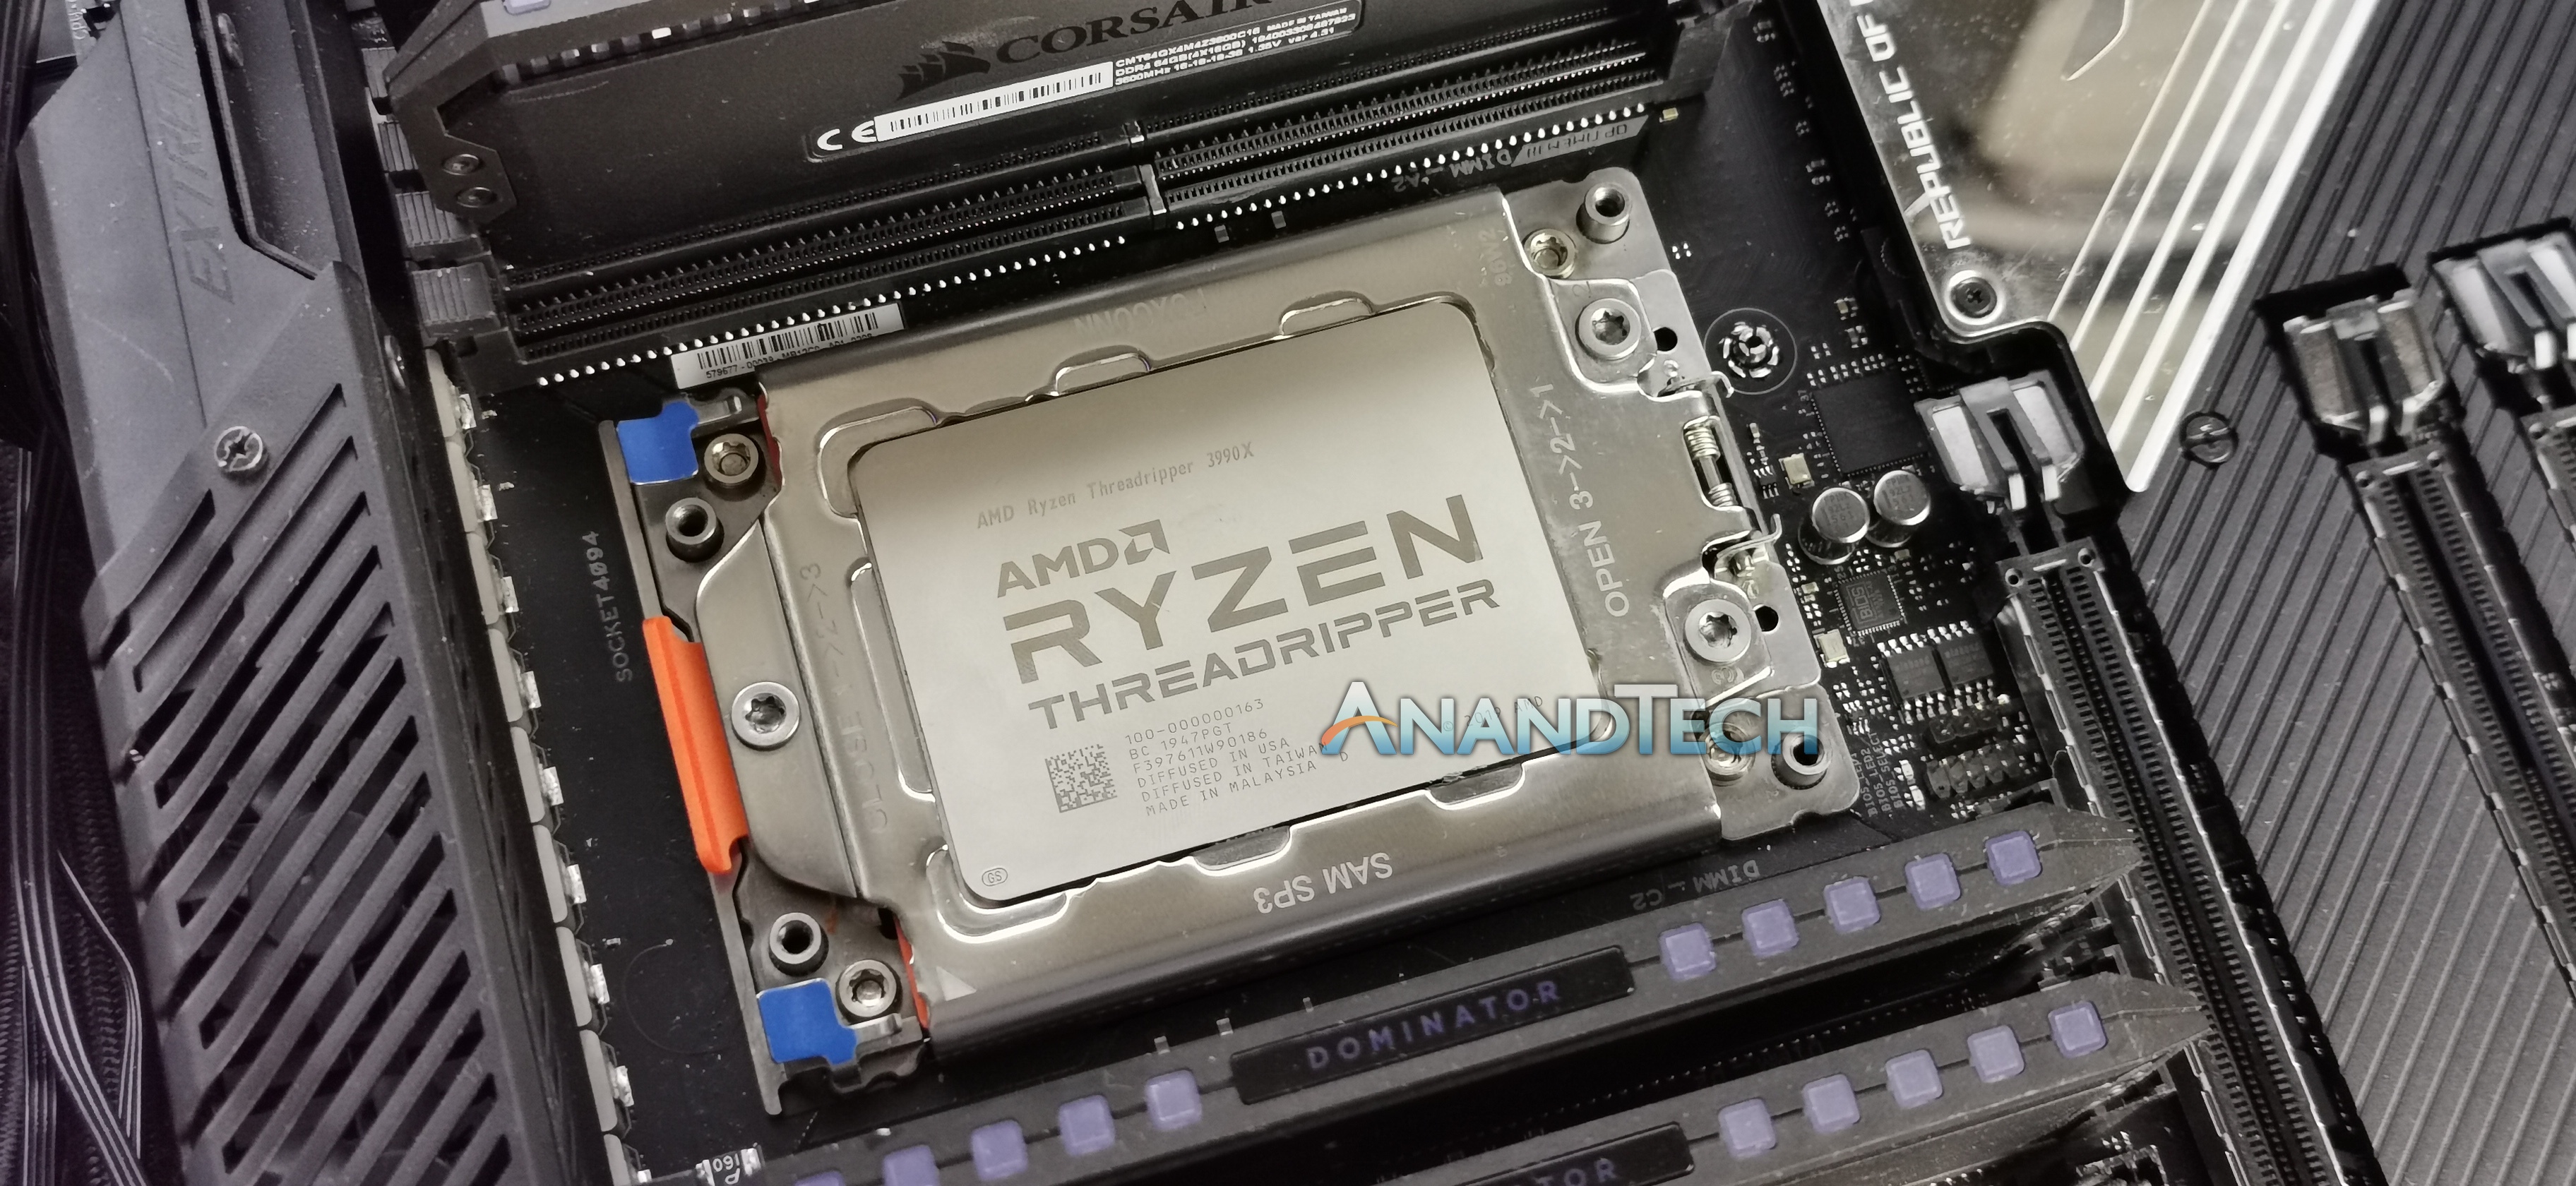 Threadripper vs Epyc - Which AMD is best for professional workstations?